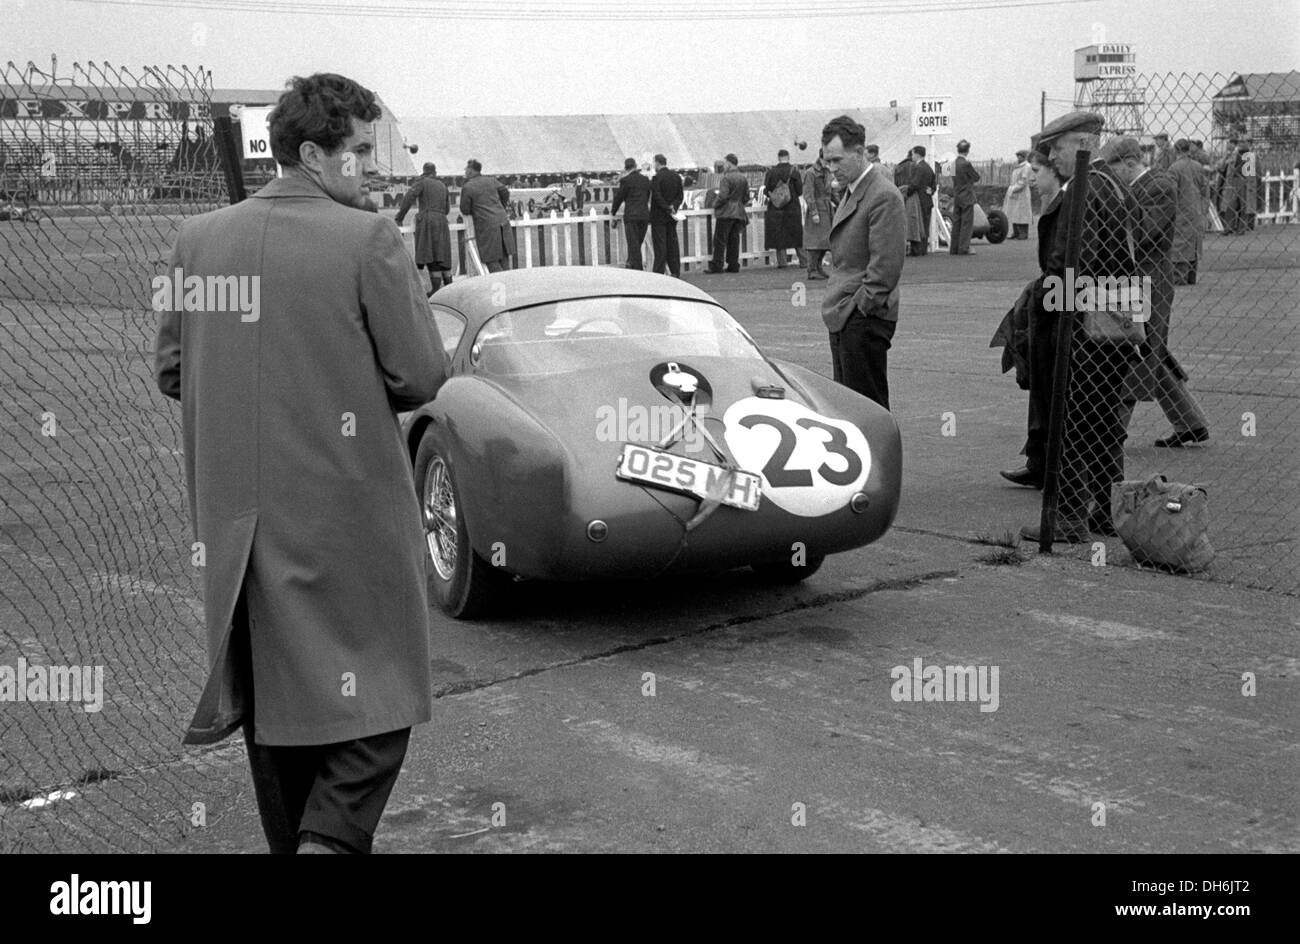 Roy Salvadori in his Aston Martin DB3S Coupe, finished 7th in the Silverstone International race, England 15th May 1954. Stock Photo